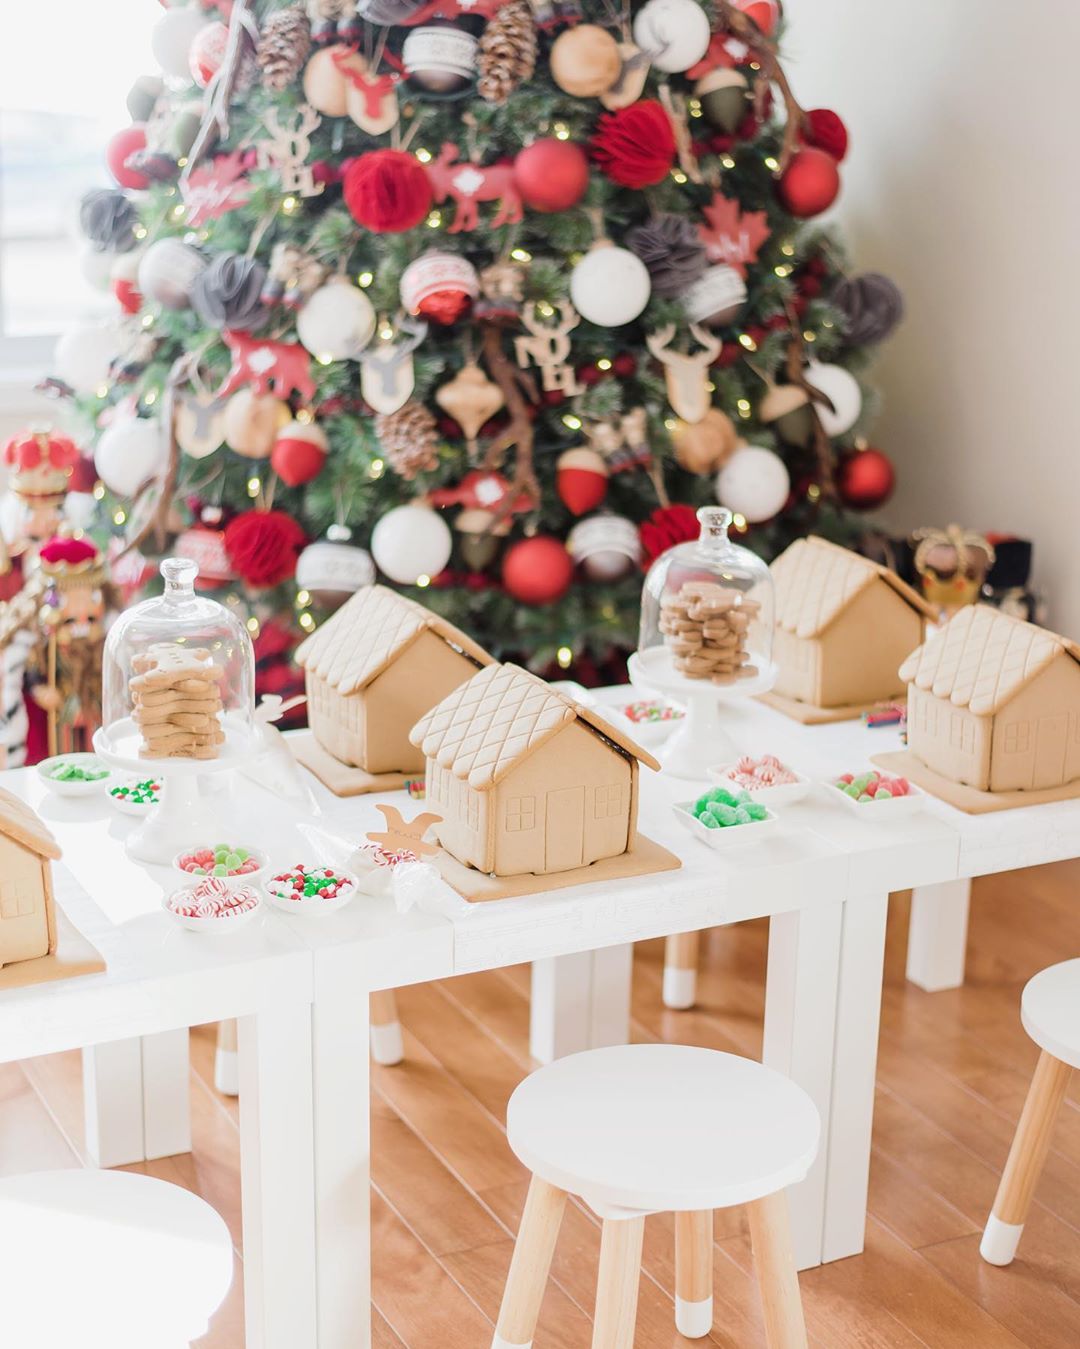 Christmas table with Gingerbread houses. Photo by Instagram user @pomponsevents